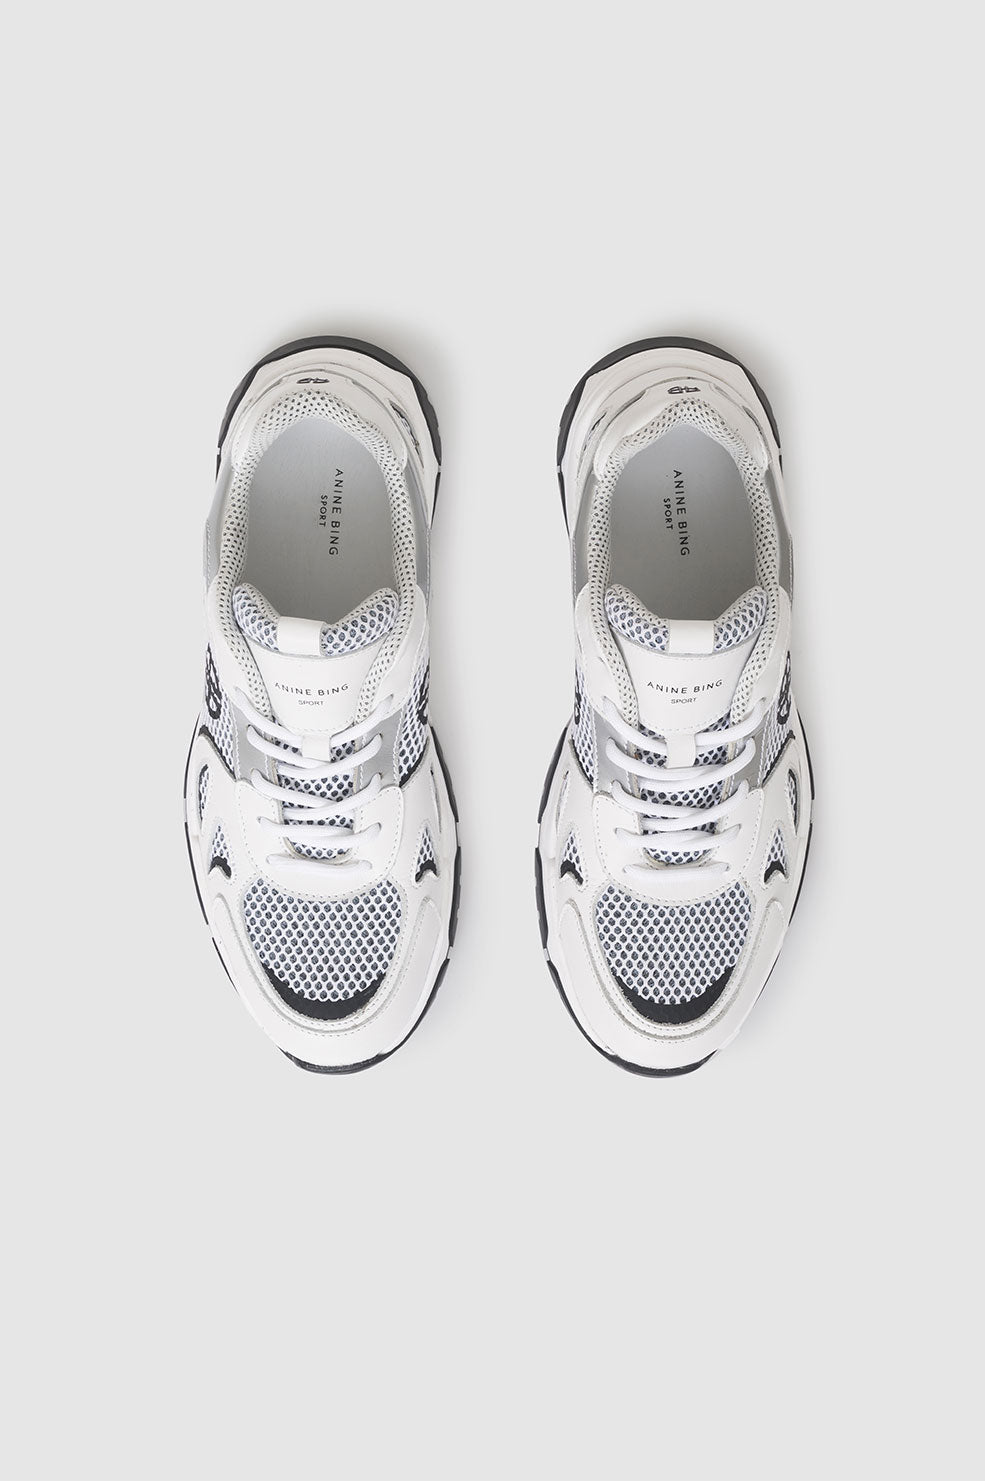 Anine Bing Brody Sneakers in White available at TNT The New Trend Australia.